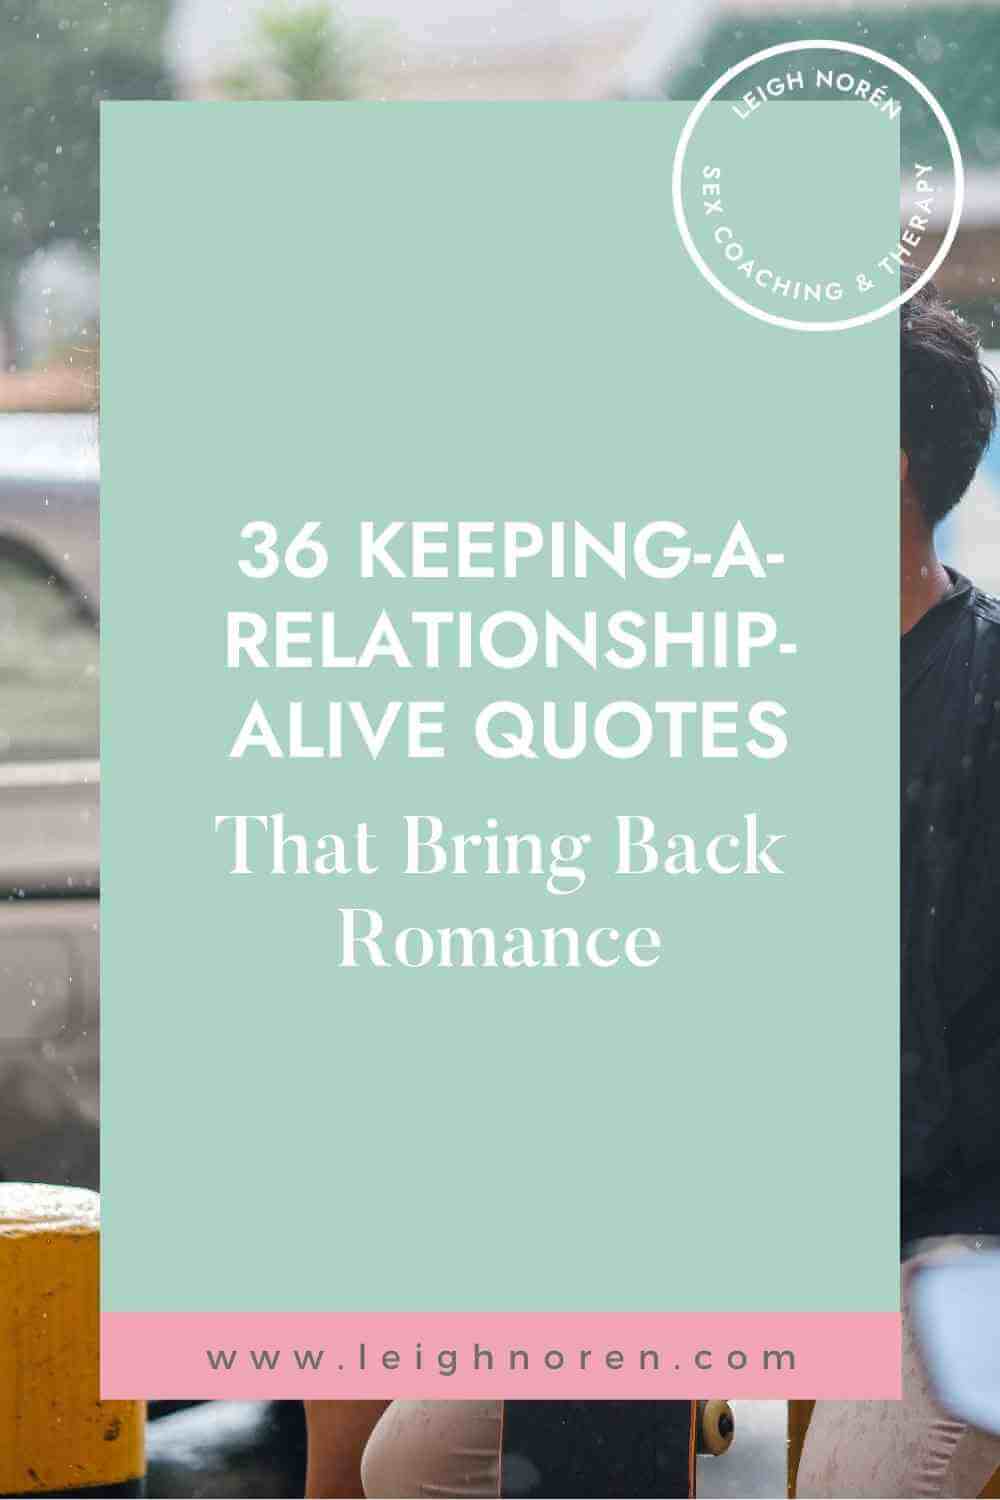 36 Keeping-A-Relationship-Alive Quotes That Bring Back Romance